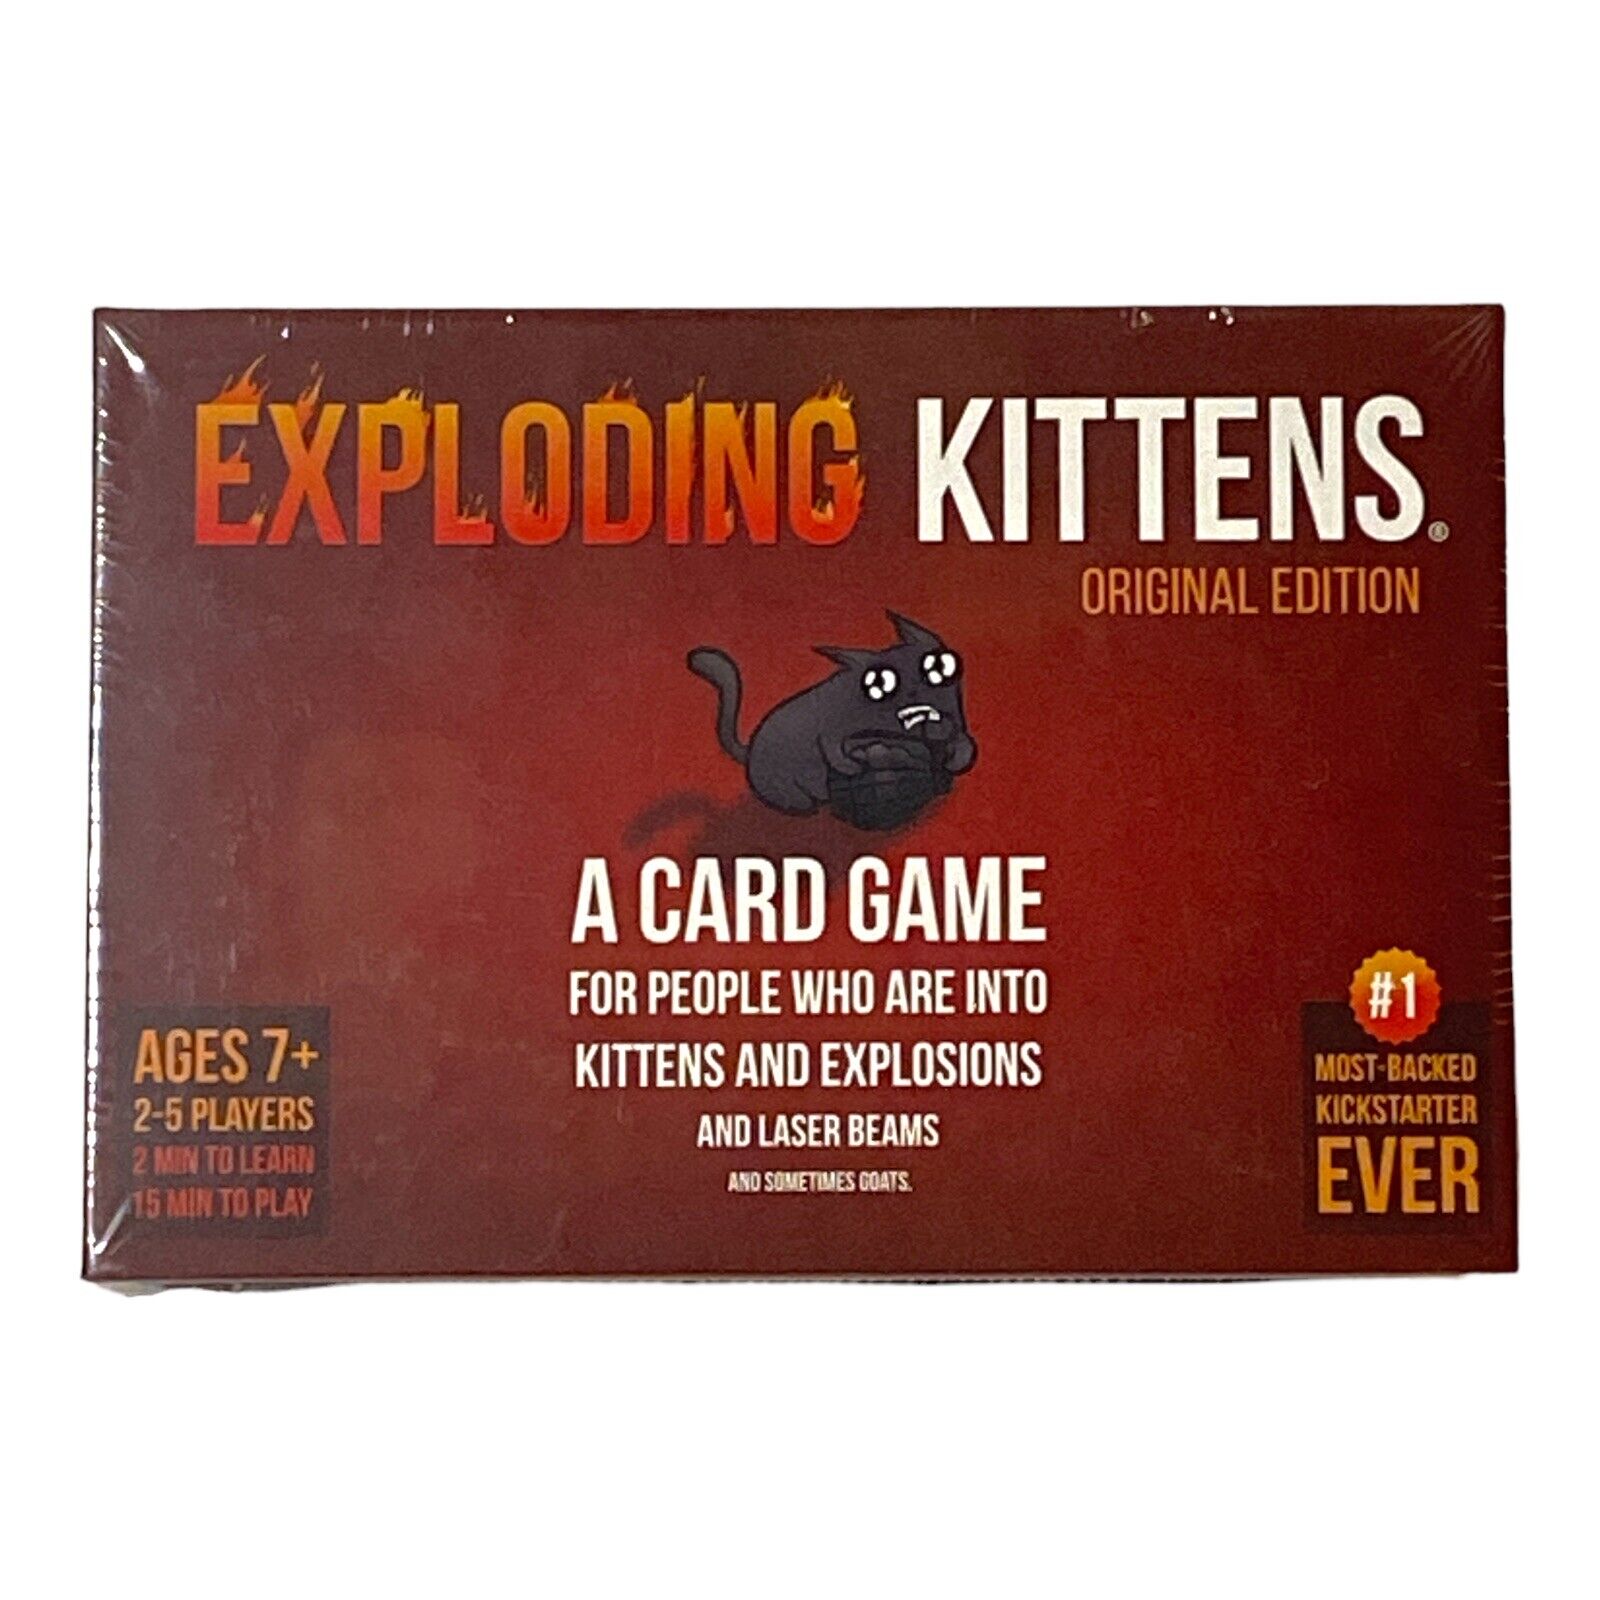 Exploding Kittens Card Game - Original Edition with Bonus Code New Sealed